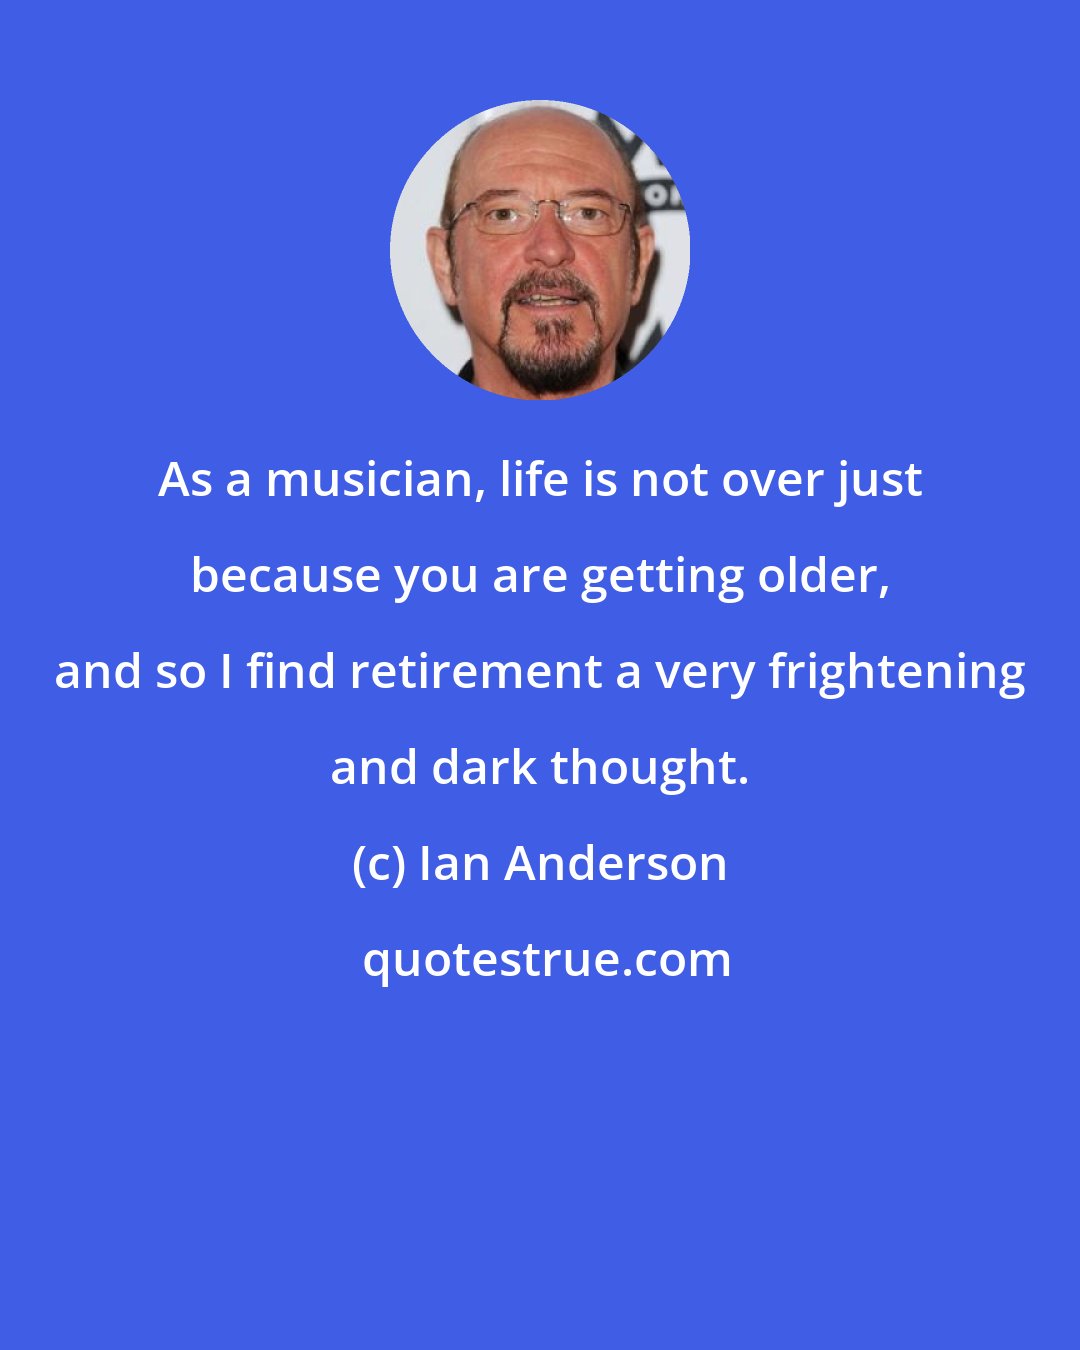 Ian Anderson: As a musician, life is not over just because you are getting older, and so I find retirement a very frightening and dark thought.